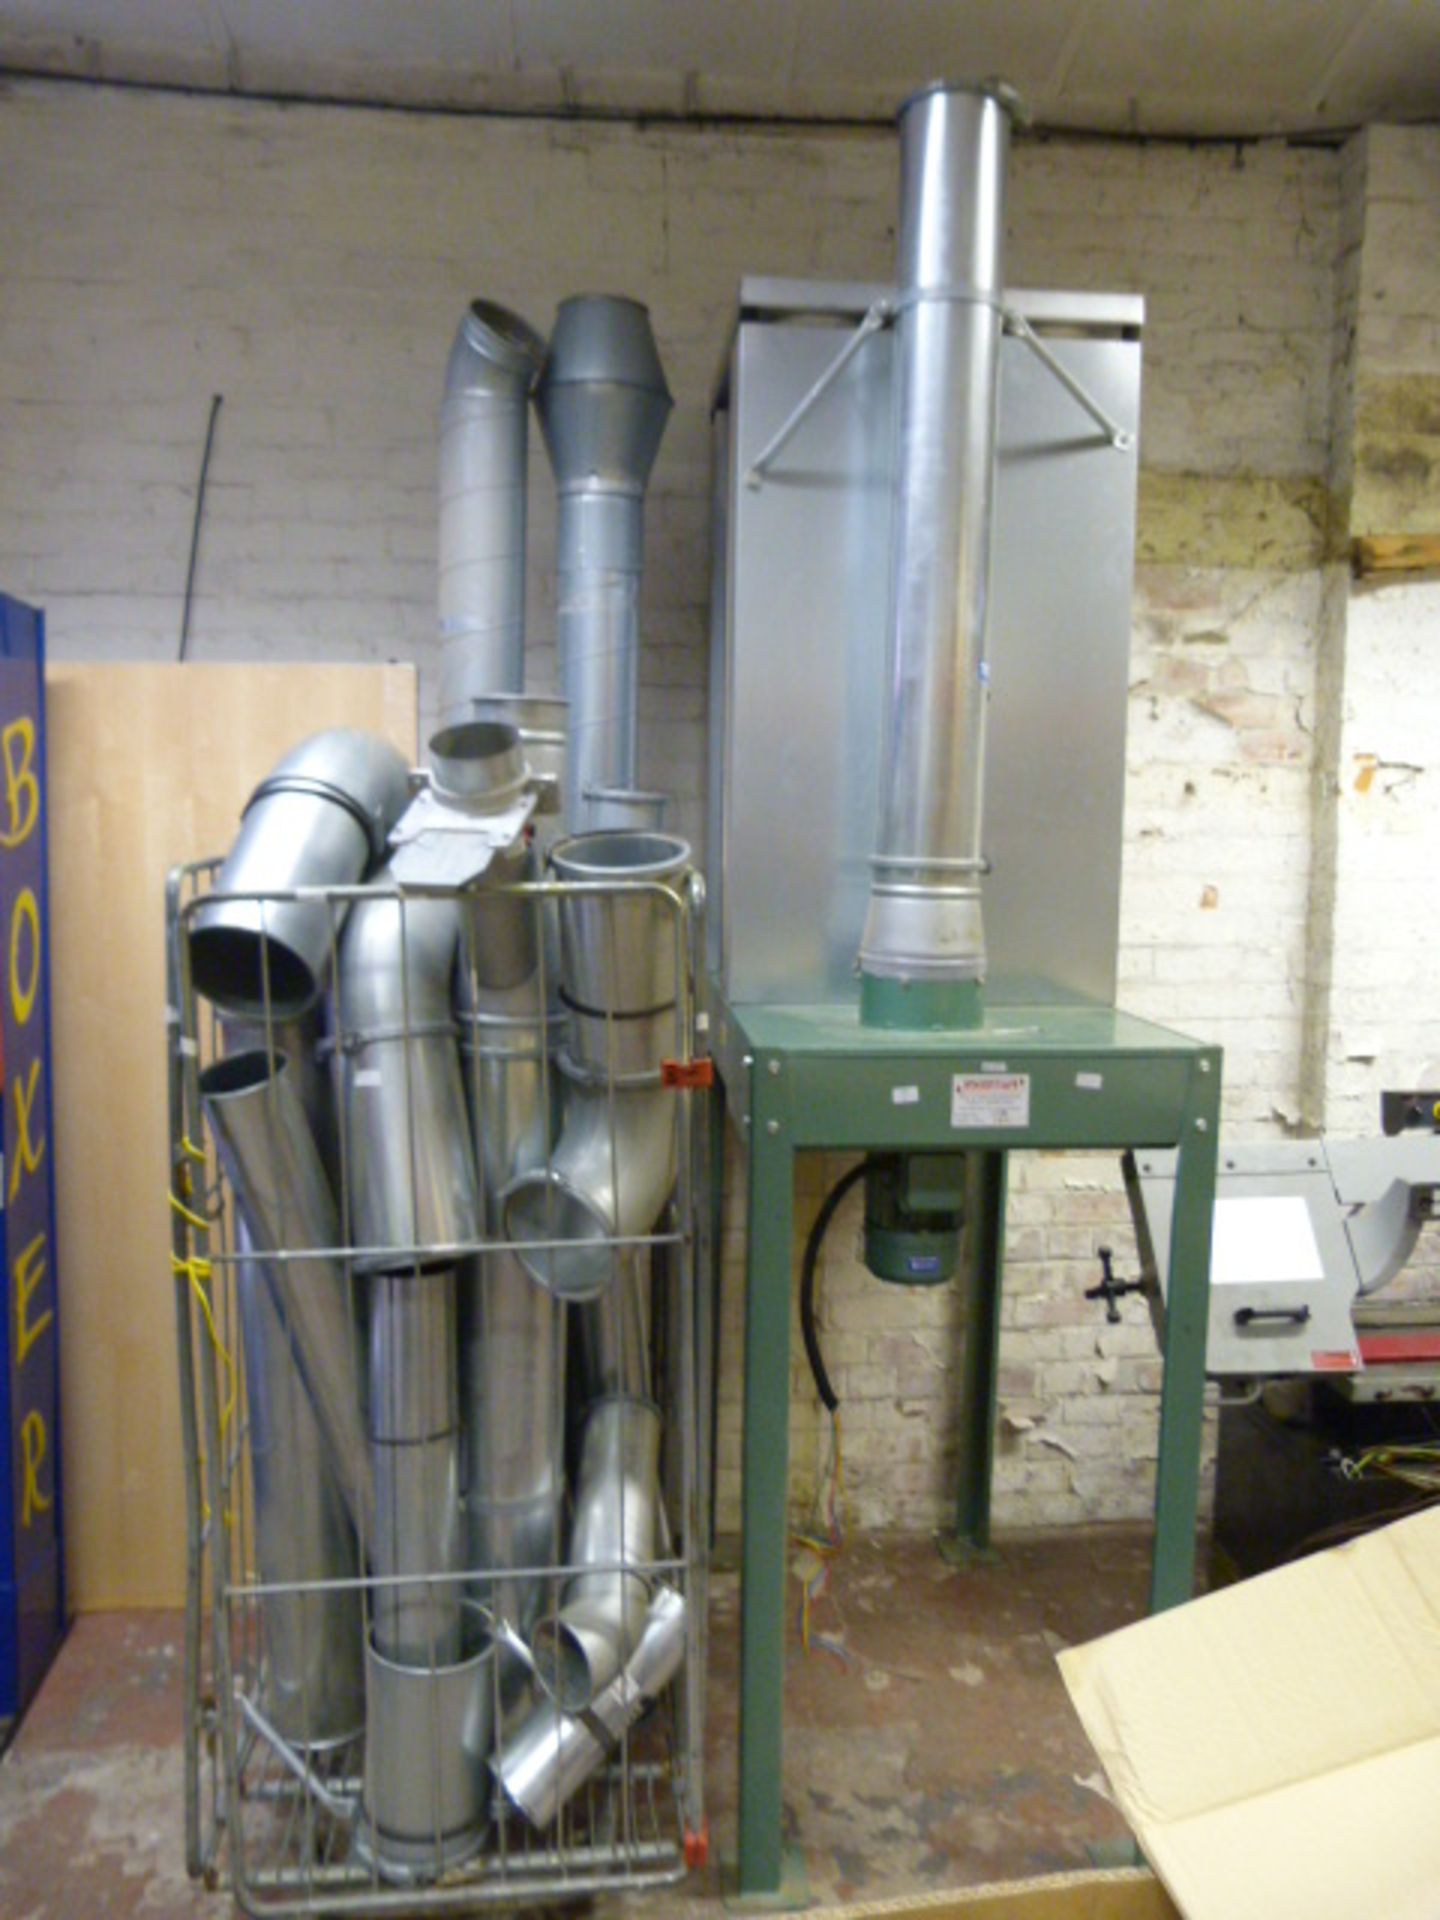 *Inventar Dust & Fume Extractor with a Cage of Ass